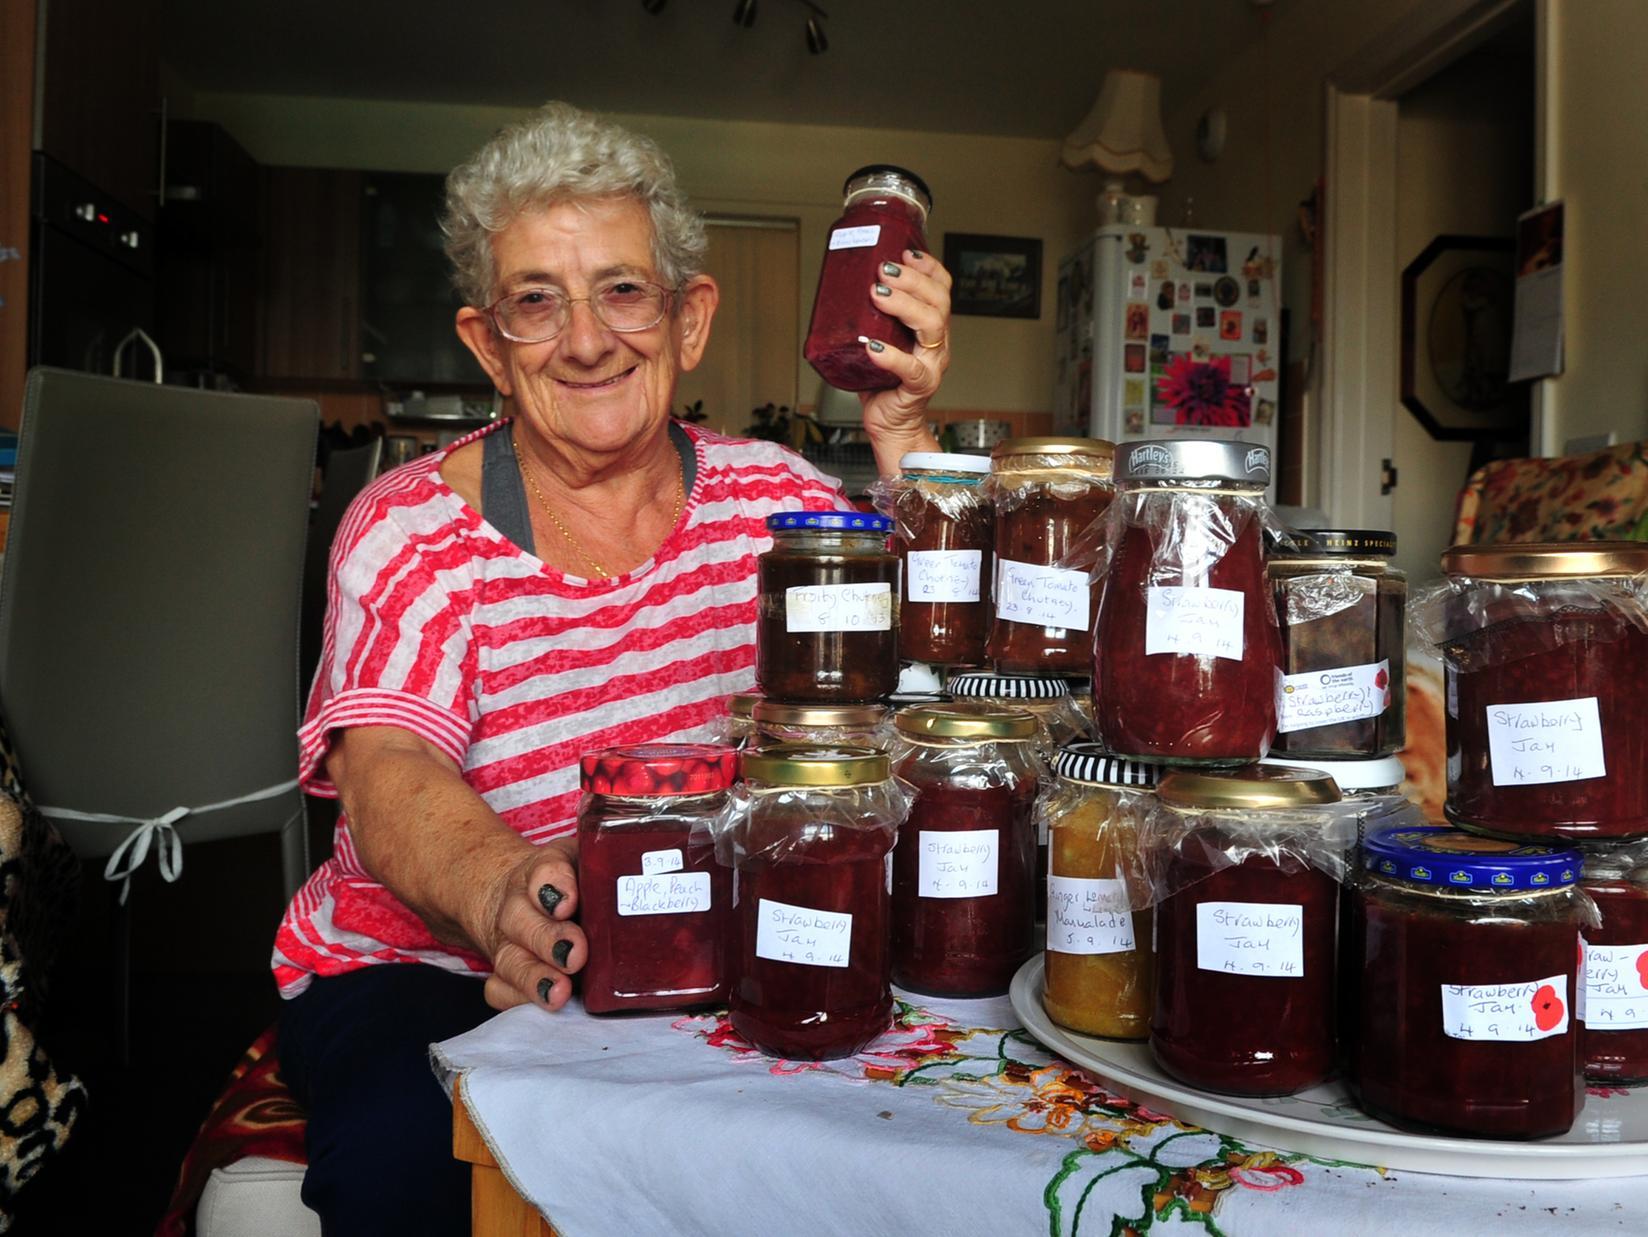 Angela Butcher, from Hunslet, made jams, chutneys and pies to raise money for Half and Half.